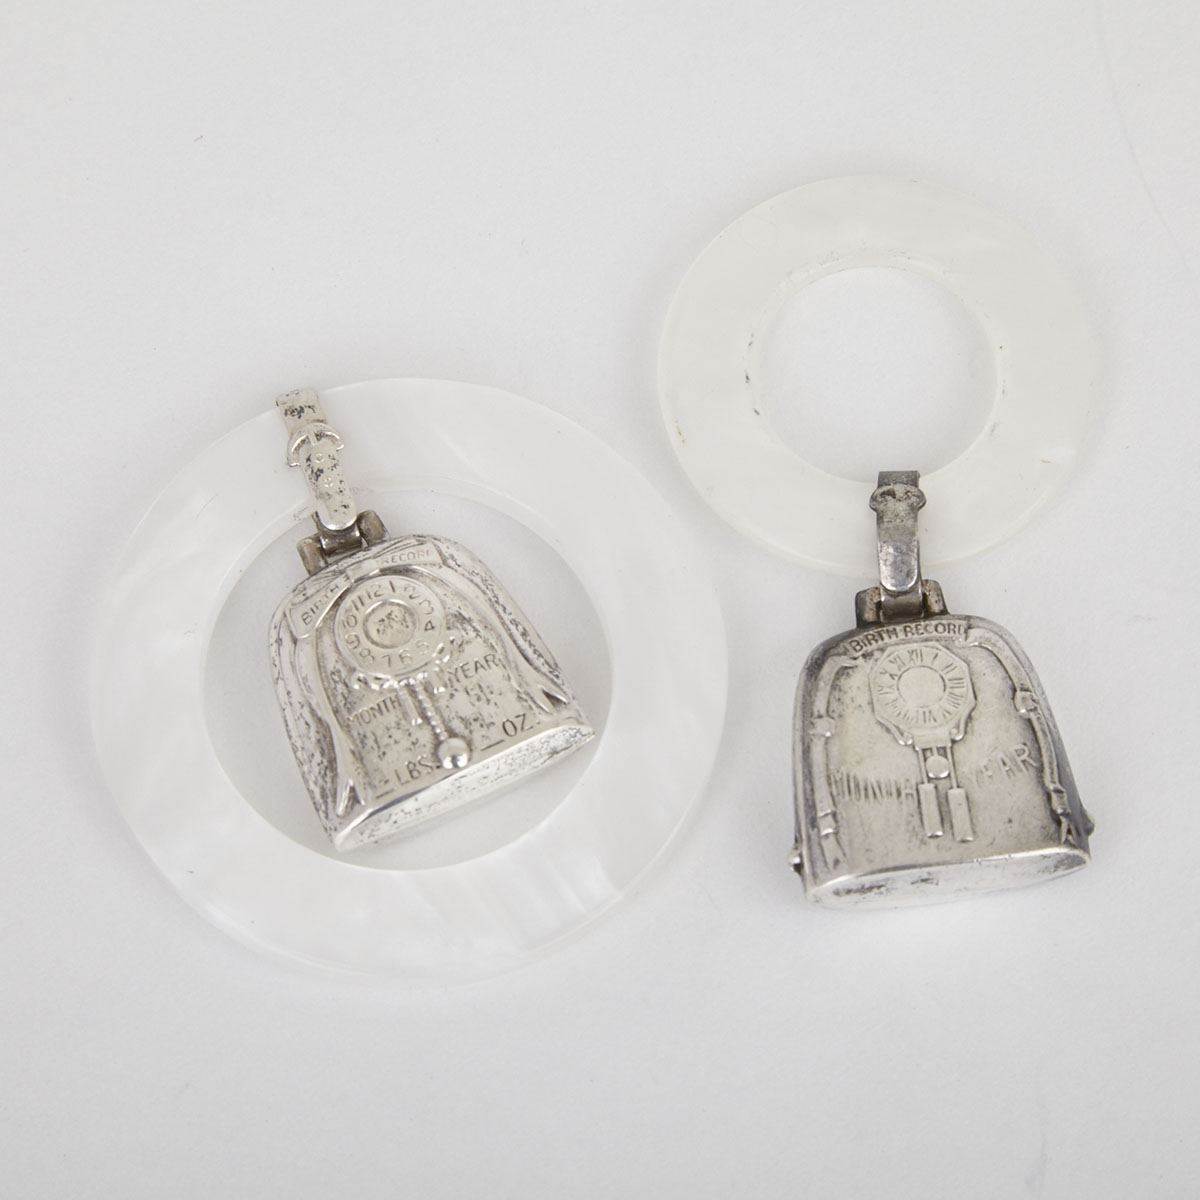 Two American Silver Child’s Rattles, Webster Co., North Attleboro, Mass., 20th century